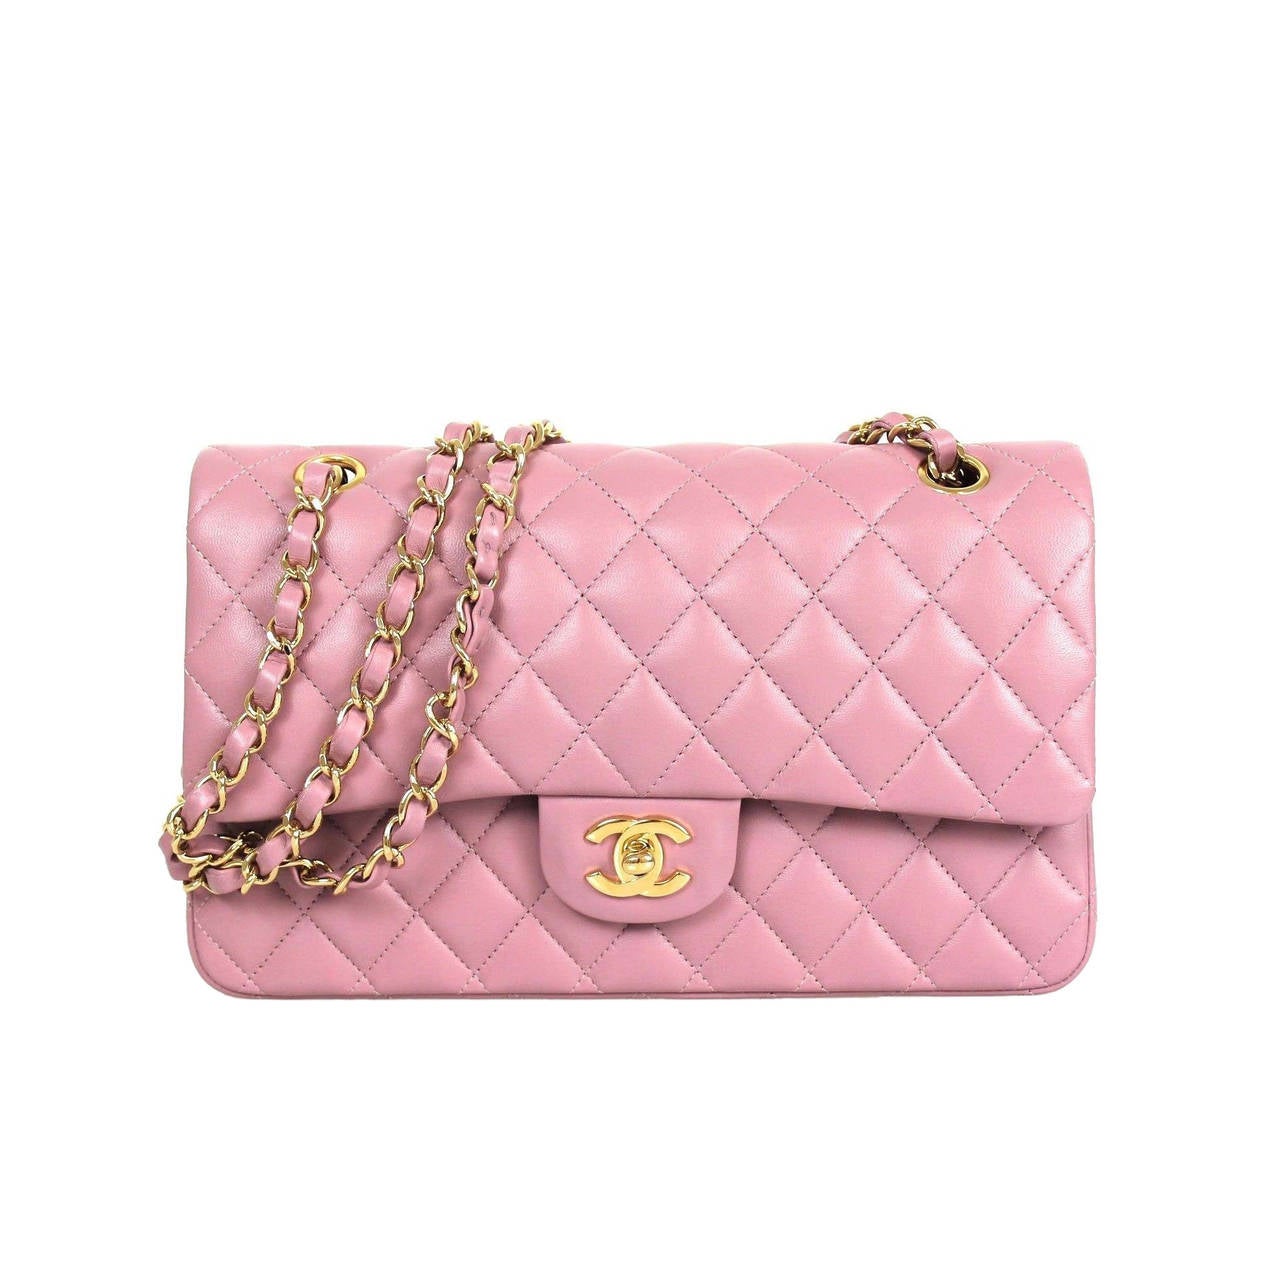 Stunning Chanel Quilted Lambskin Leather Lilac Light Purple Classic  Timeless Medium lined Flap Handbag with Matte Gold Champaign Hardware!